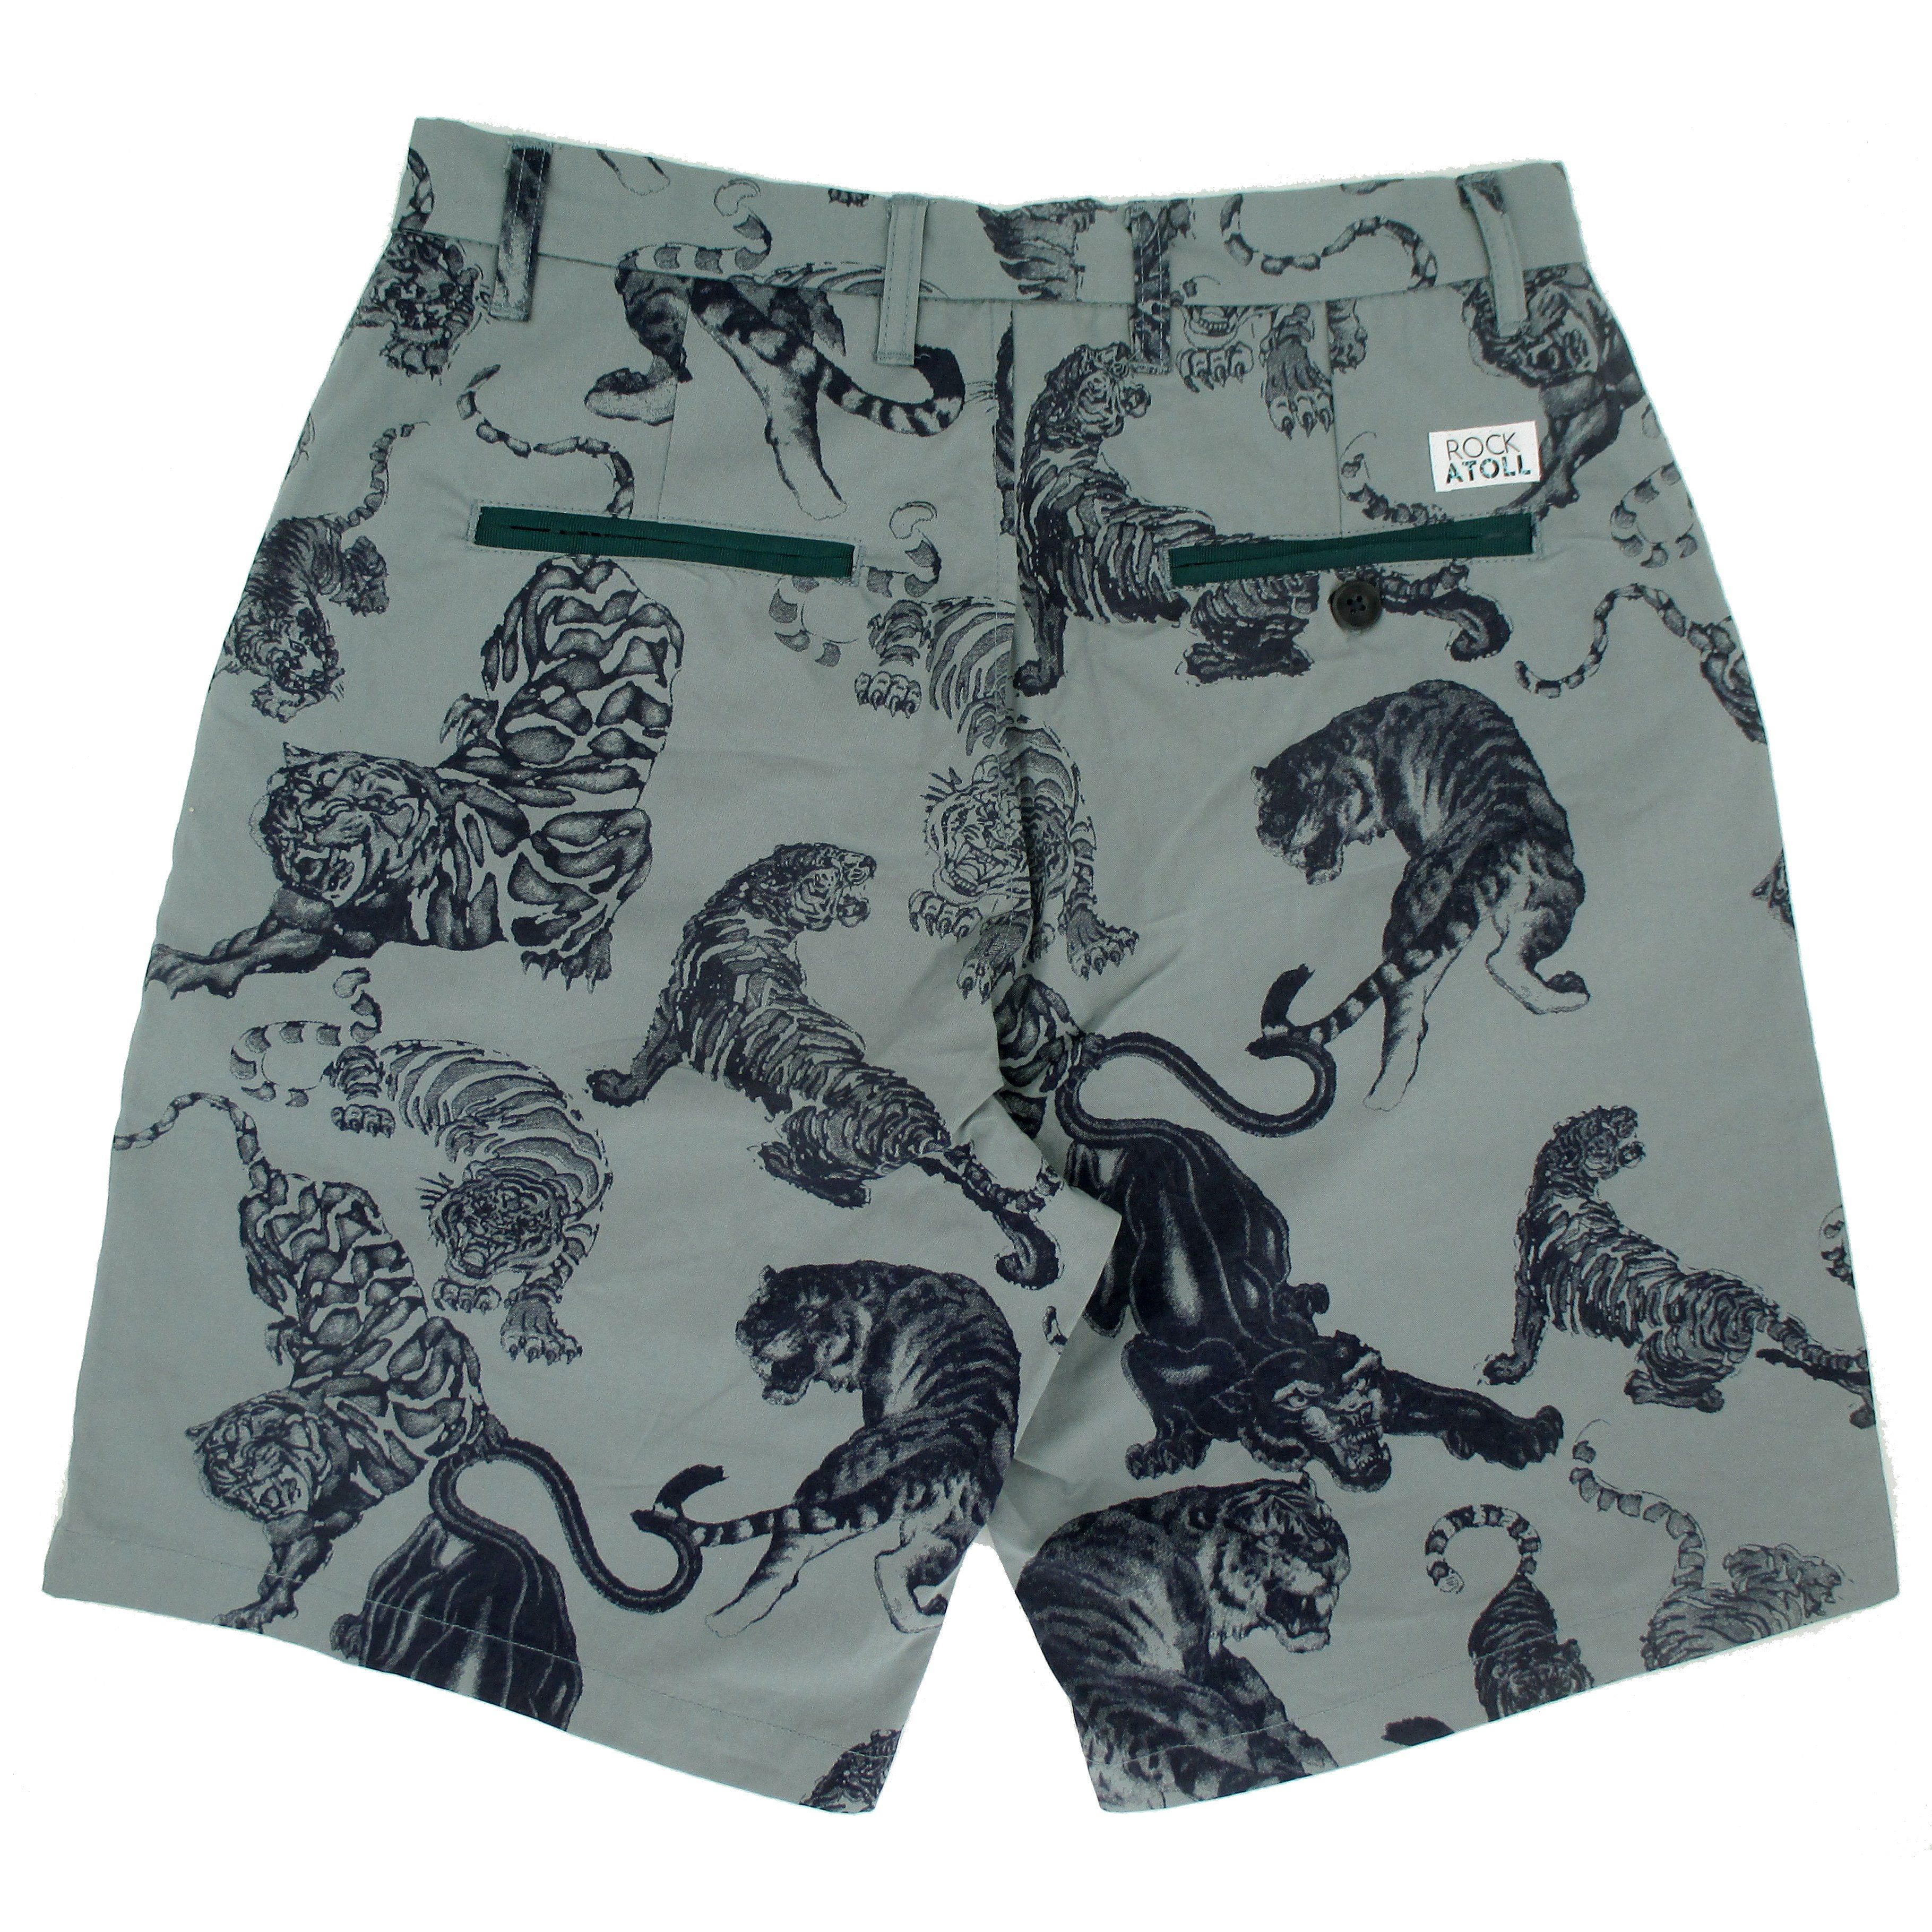 Rock Atoll Men's Flat Front Going Out Golf Shorts with Fun Crazy Panther Jaguar Leopard Tiger Print